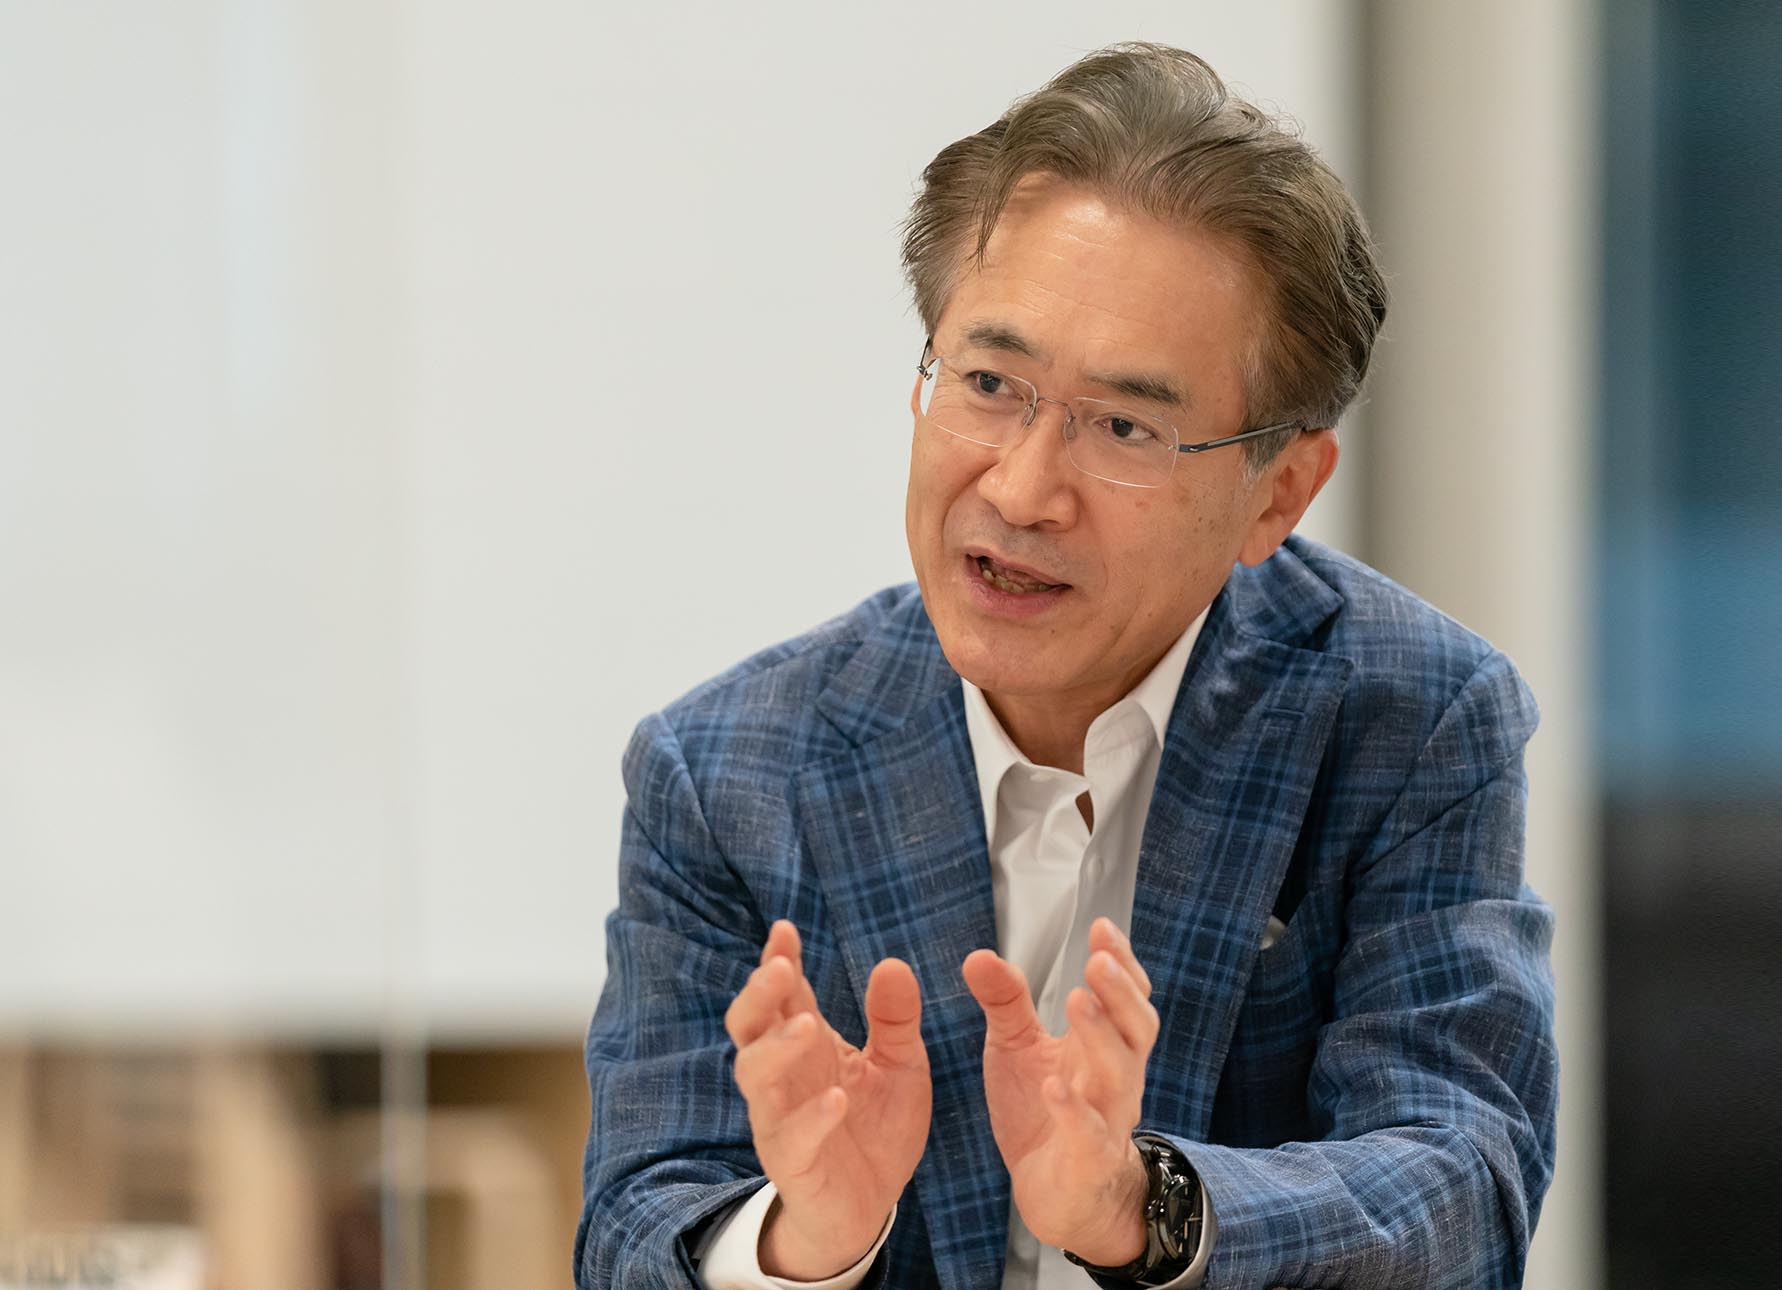 Sony CEO reveals the ‘Corporate Strategy’ towards innovation